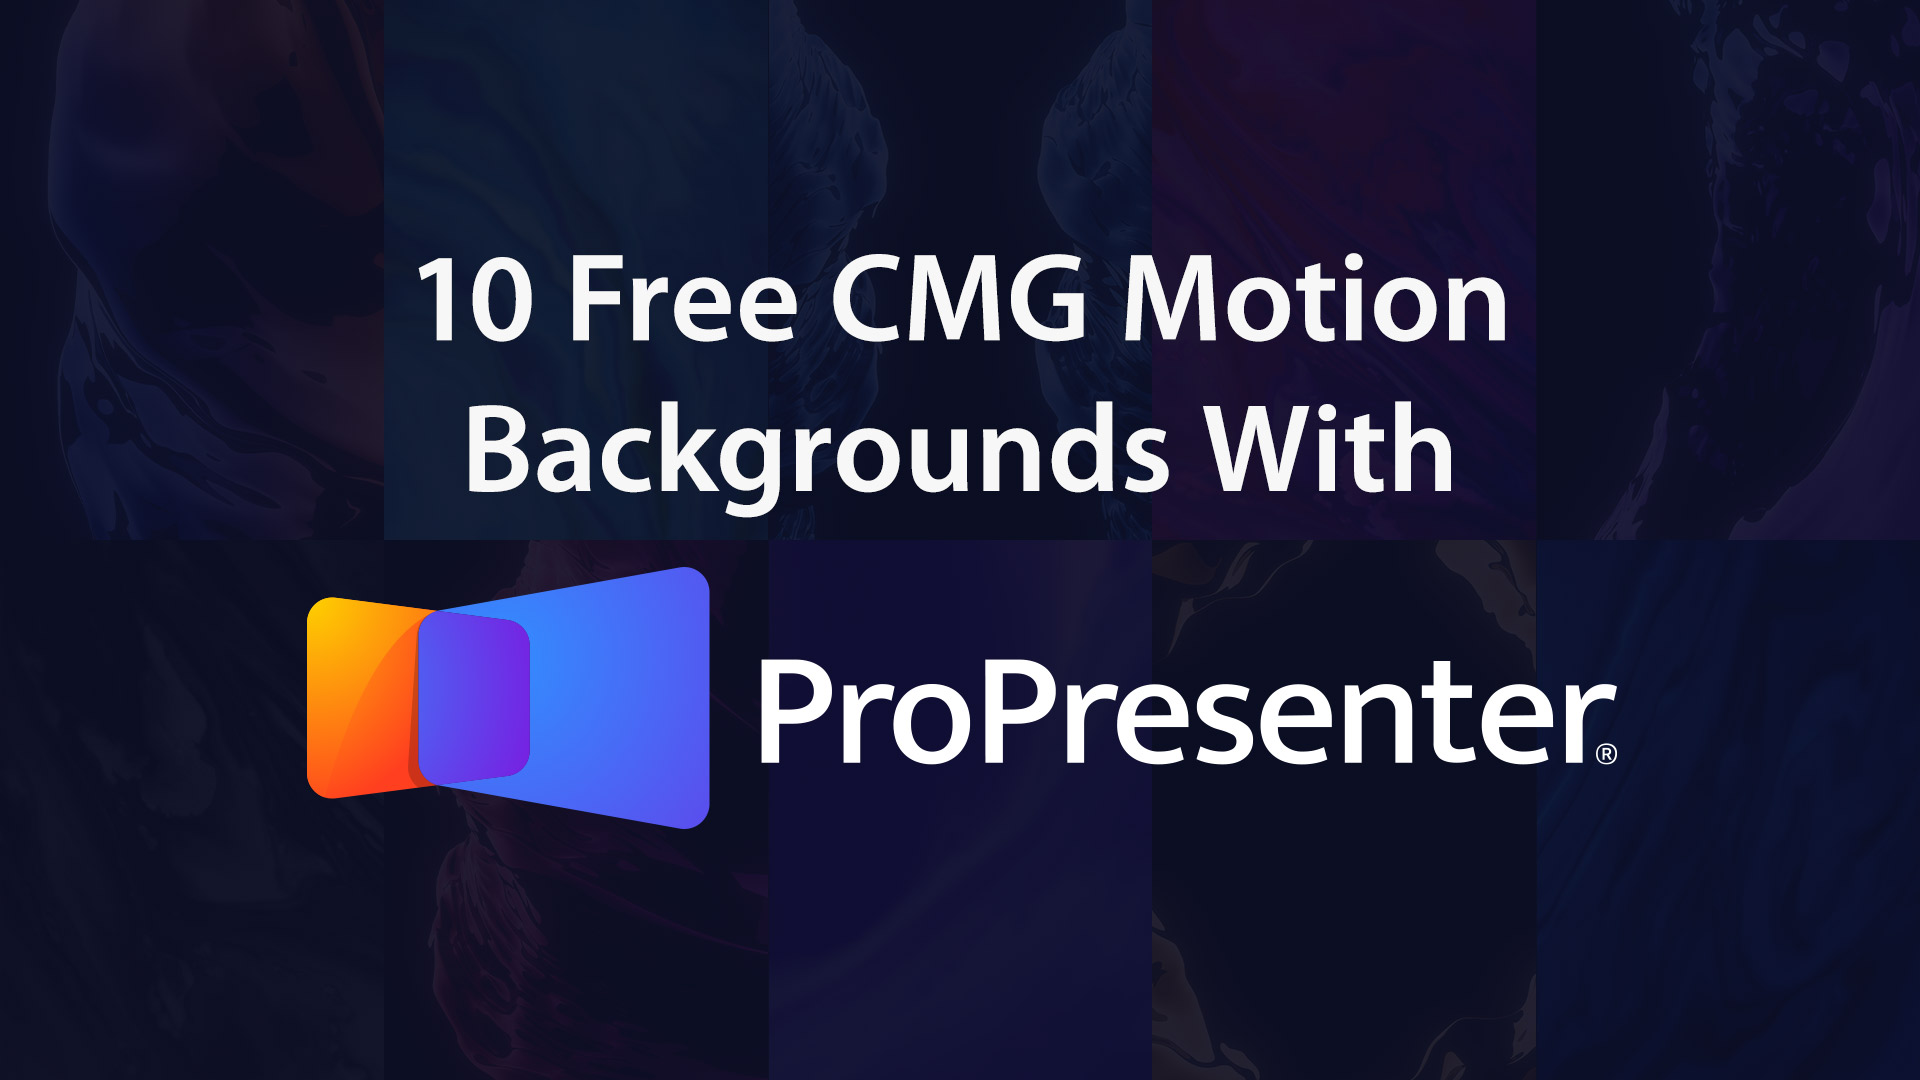 How To Cmg Motion Background With Propresenter